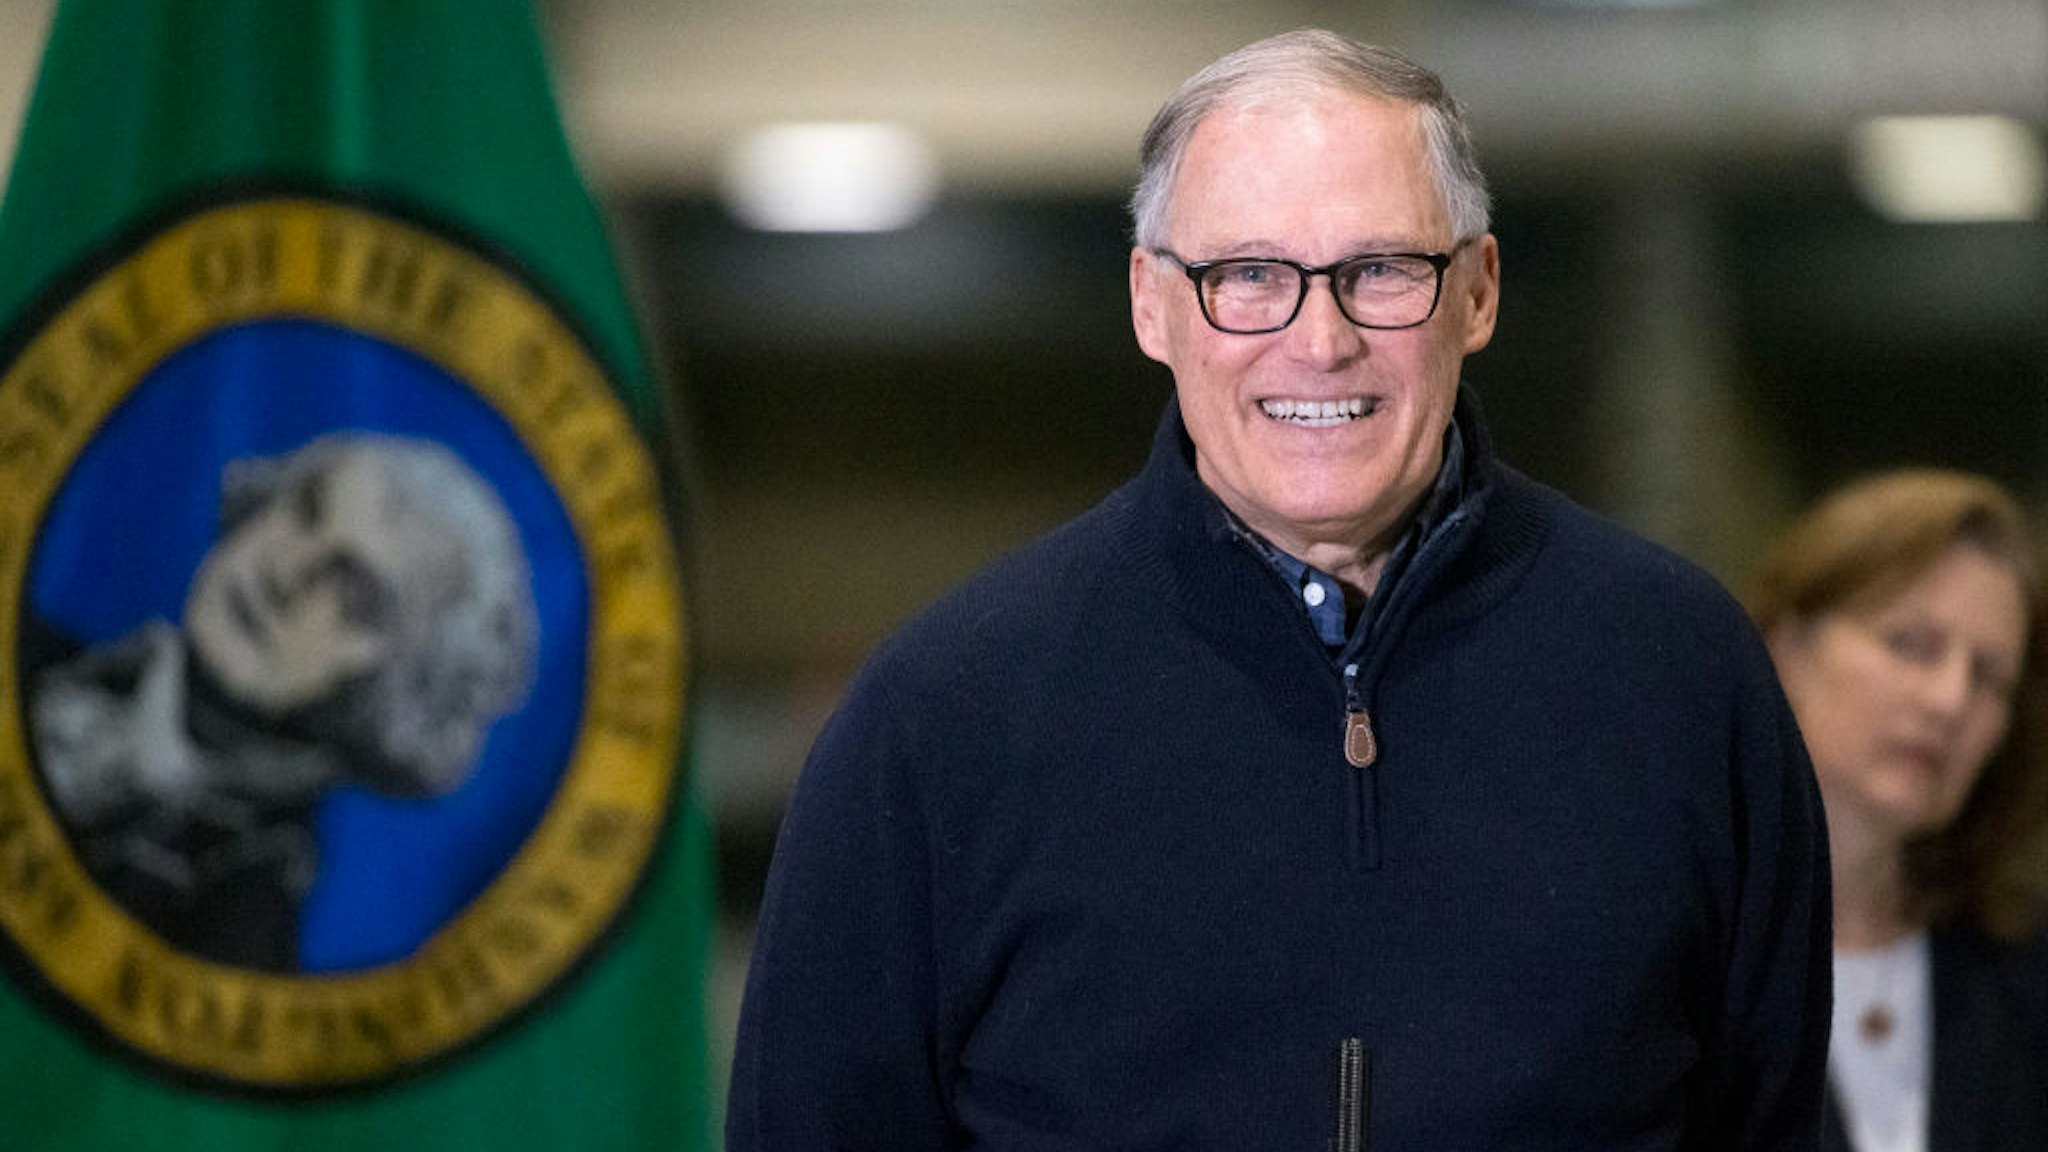 SEATTLE, WA - MARCH 28: Washington State Governor Jay Inslee and other leaders speak to the press on March 28, 2020 in Seattle, Washington. The governor discussed deployment of a new field hospital at CenturyLink Field Event Center which is expected to create at least 150 hospital beds for non-COVID-19 cases and will include 300 soldiers from the 627th Army Hospital at Fort Carson, Colorado.